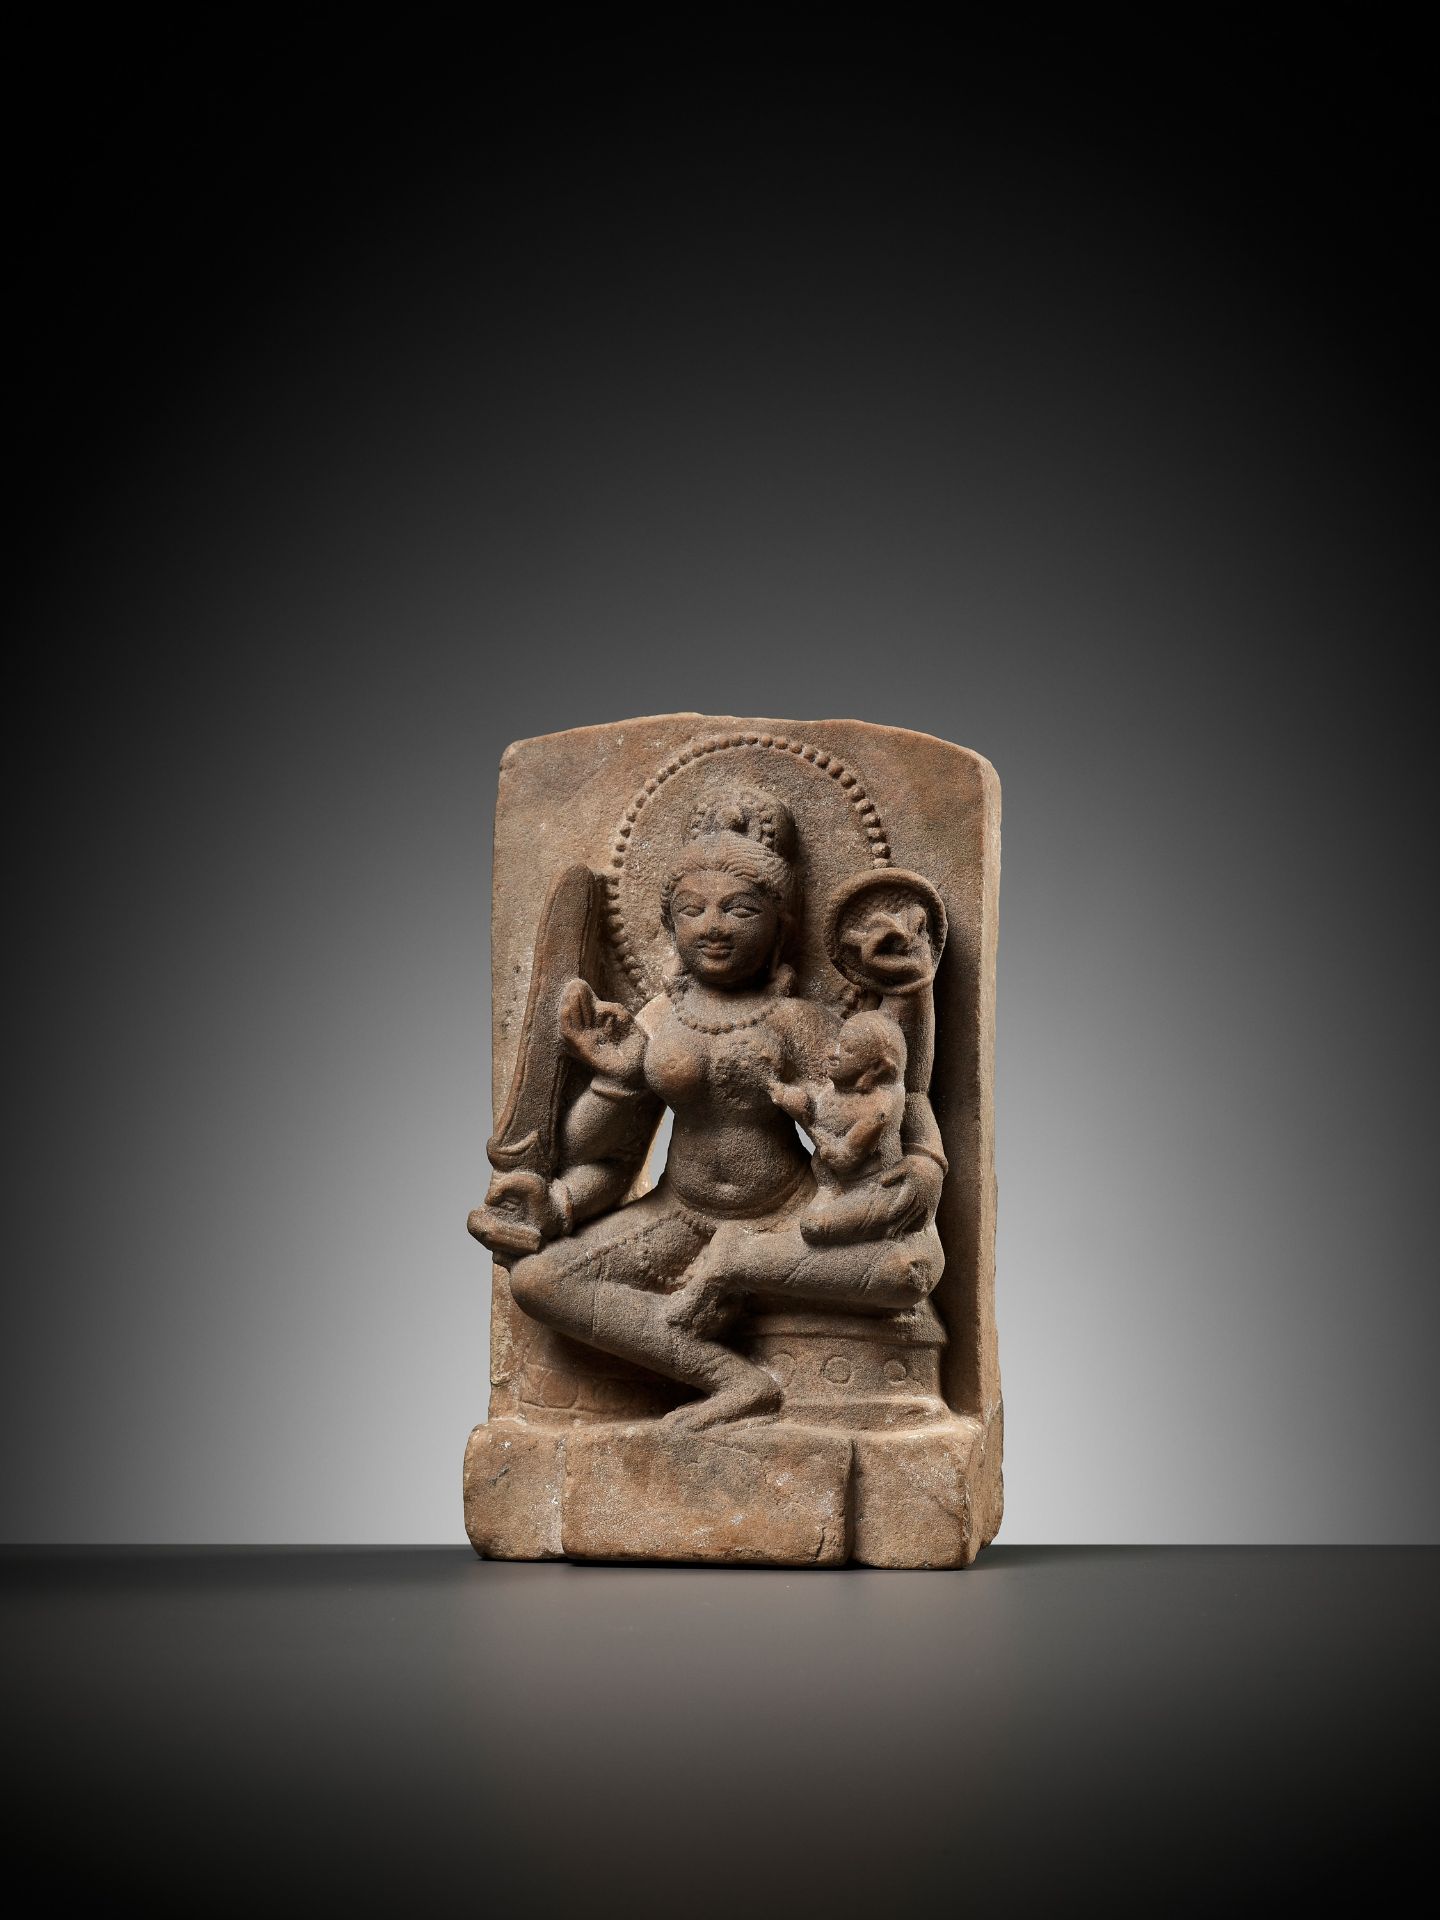 A RARE SANDSTONE MINATURE STELE FIGURE OF A MOTHER GODDESS WITH CHILD - Image 2 of 10